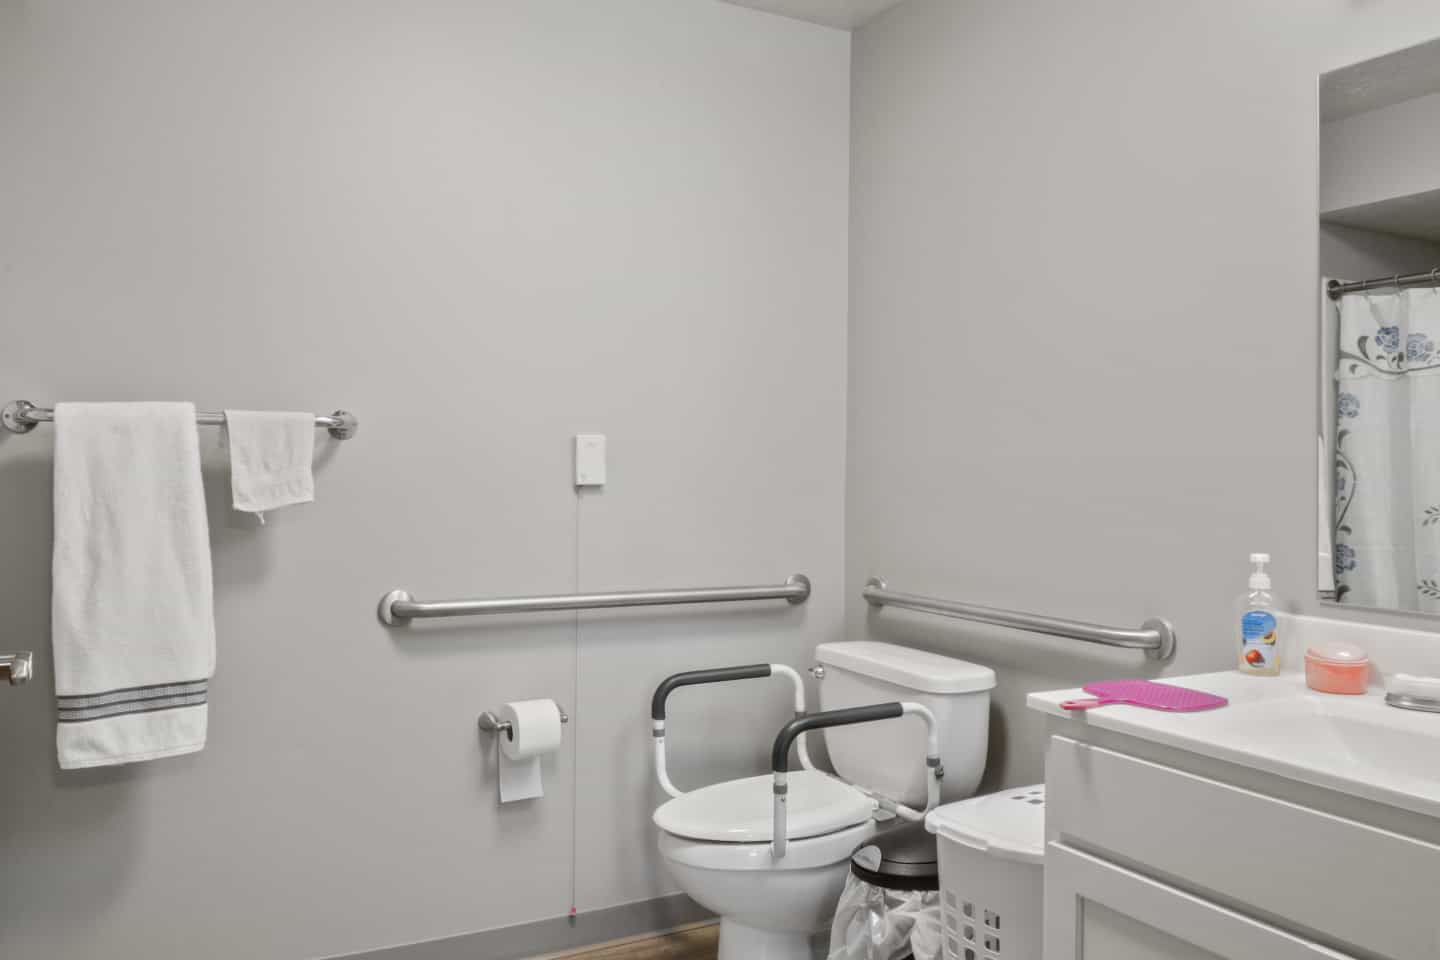 Assisted Living - One Bedroom Bathroom